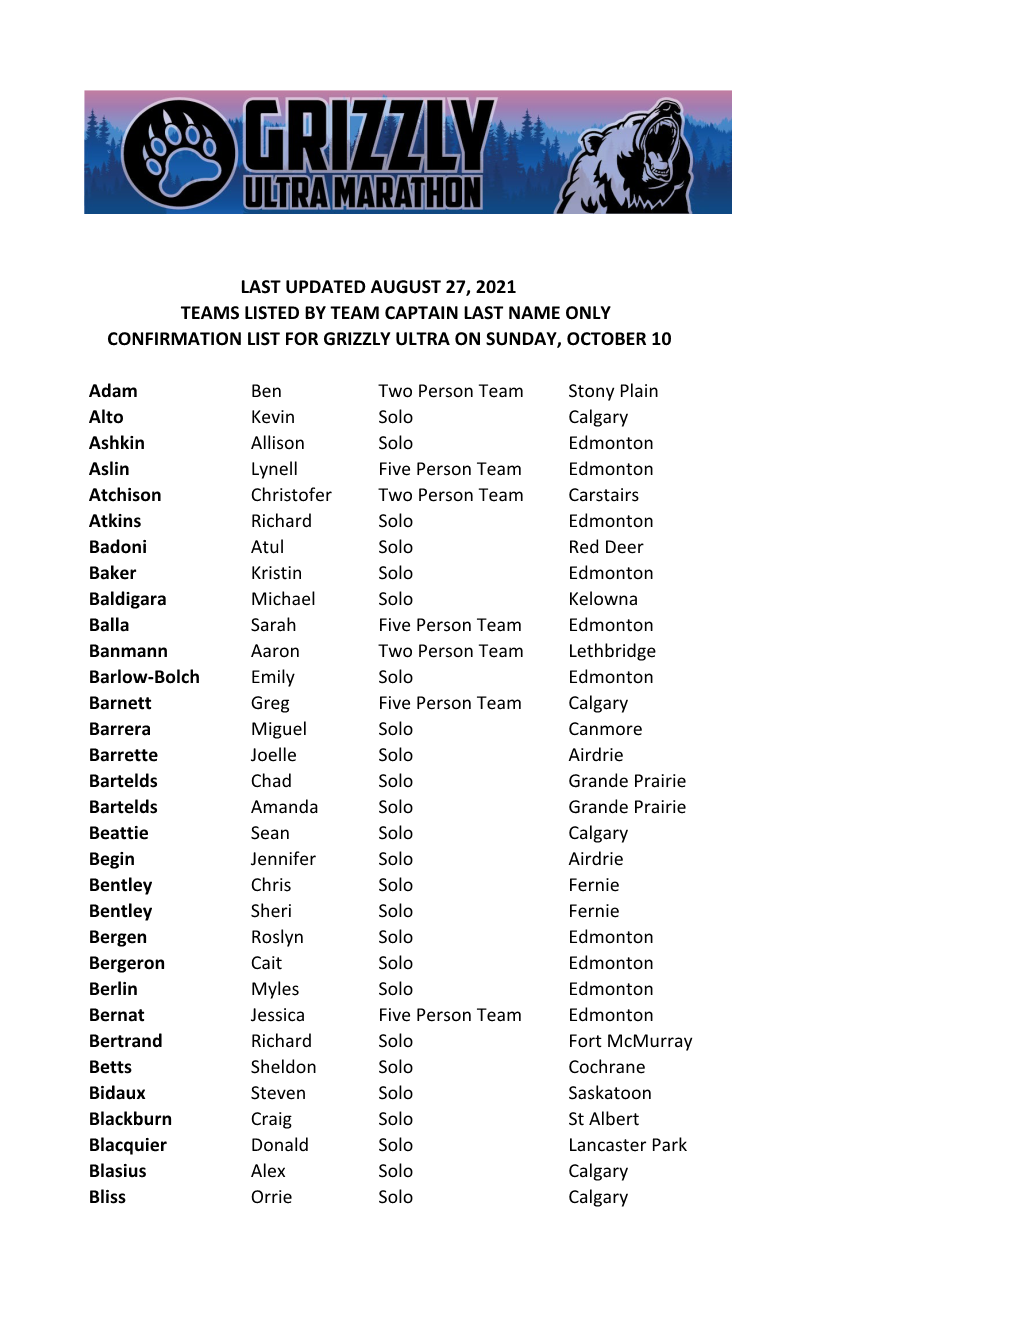 Last Updated August 27, 2021 Teams Listed by Team Captain Last Name Only Confirmation List for Grizzly Ultra on Sunday, October 10